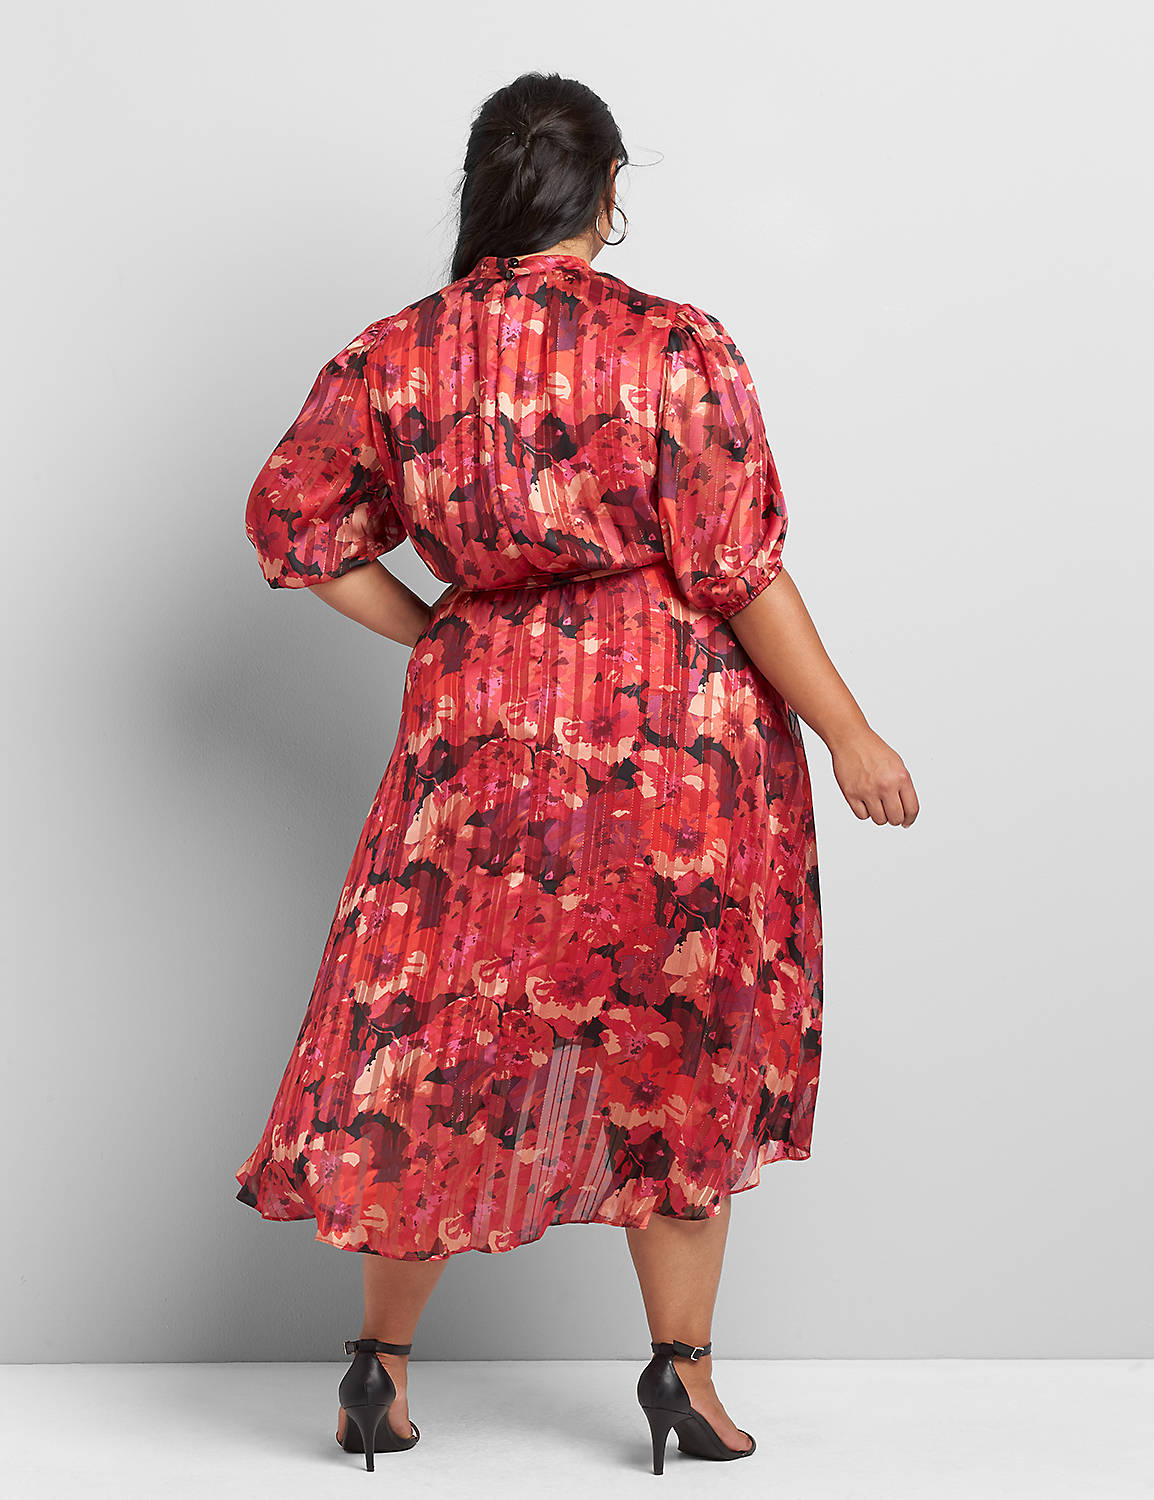 LONG SLEEVE STANDARD COLLAR ALL OVER SHADOW STRIPE FLORAL WITH BELT DRESS 1118237:GABBY SKYE RED PINK FLORAL- AS HEADER: Product Image 2